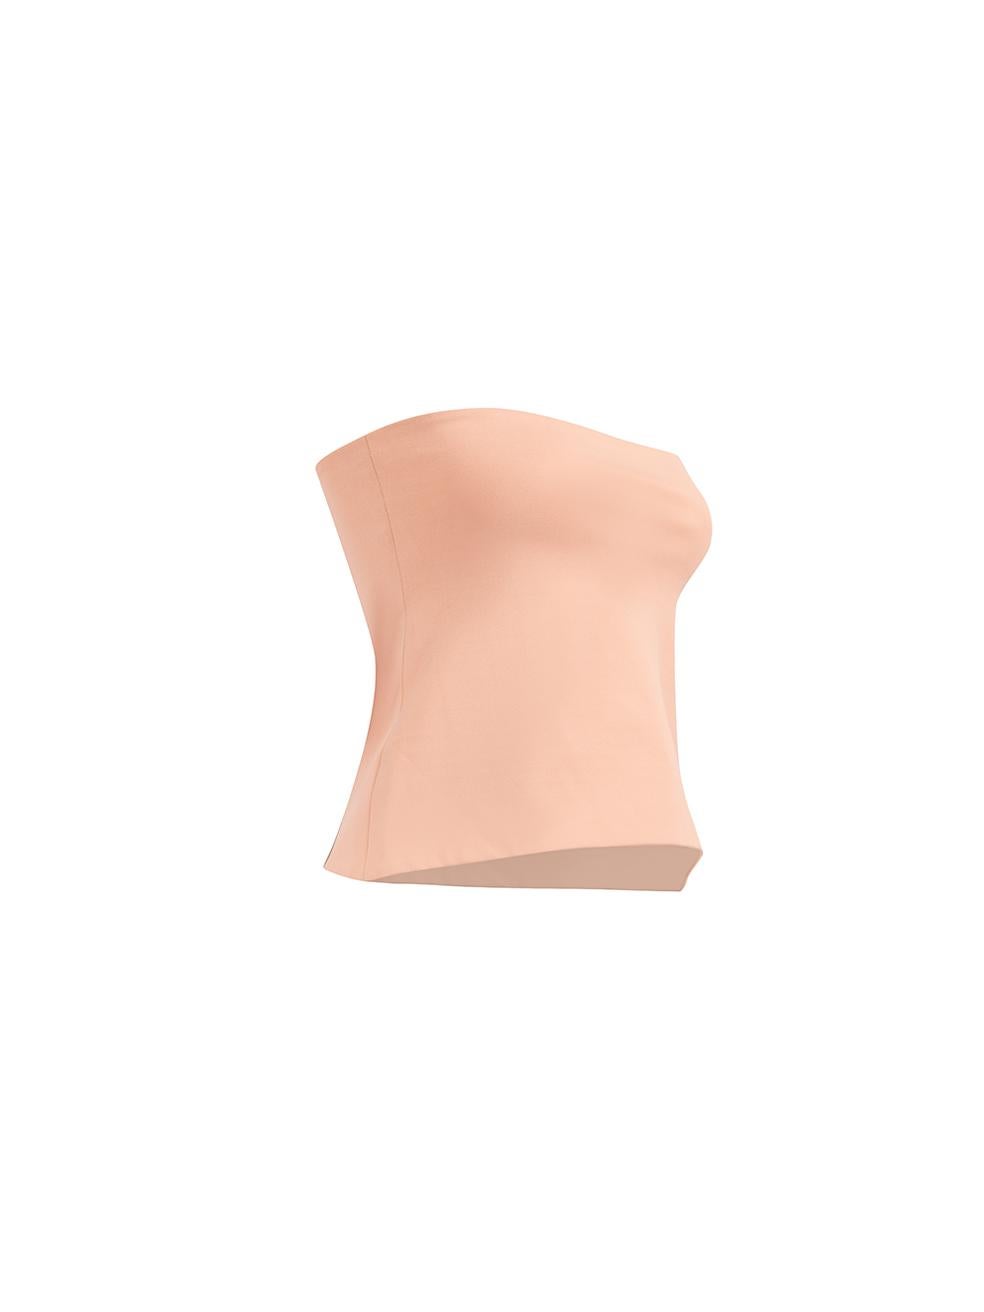 CONDITION is Never Worn. No visible wear to top is evident on this used Marni designer resale item.
Details
Pink
White
Viscose
Bustier
Form fitting
Sleeveless
Front clasp button fastening
Made in Italy
Composition
61% Viscose  23% Polyamide
Care